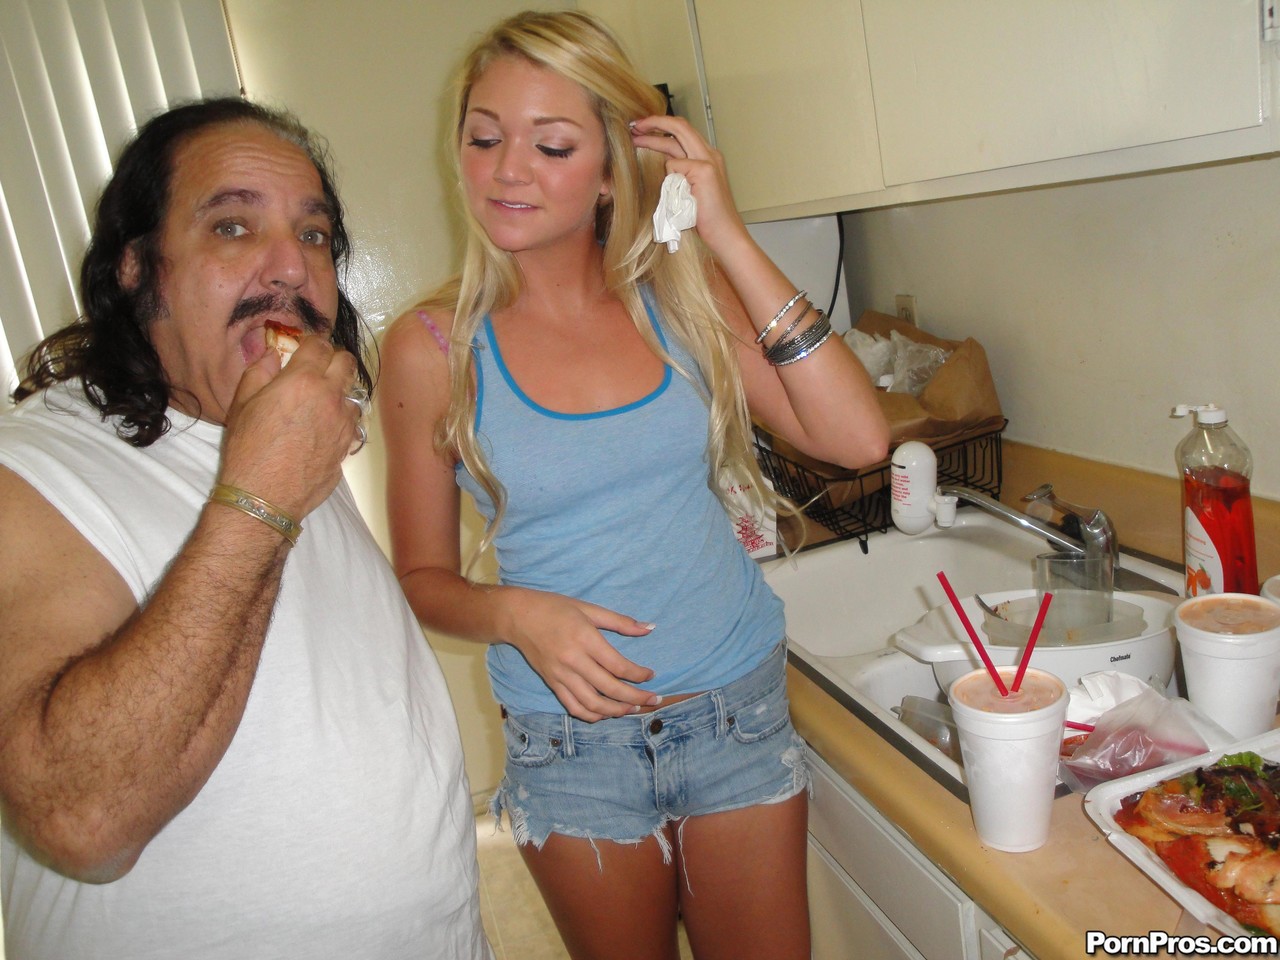 Sweet young blonde Jessie Andrews swallowing and riding an old man's cock zdjęcie porno #422620478 | Porn Pros Network Pics, Jessie Andrews, Ron Jeremy, Blonde, mobilne porno